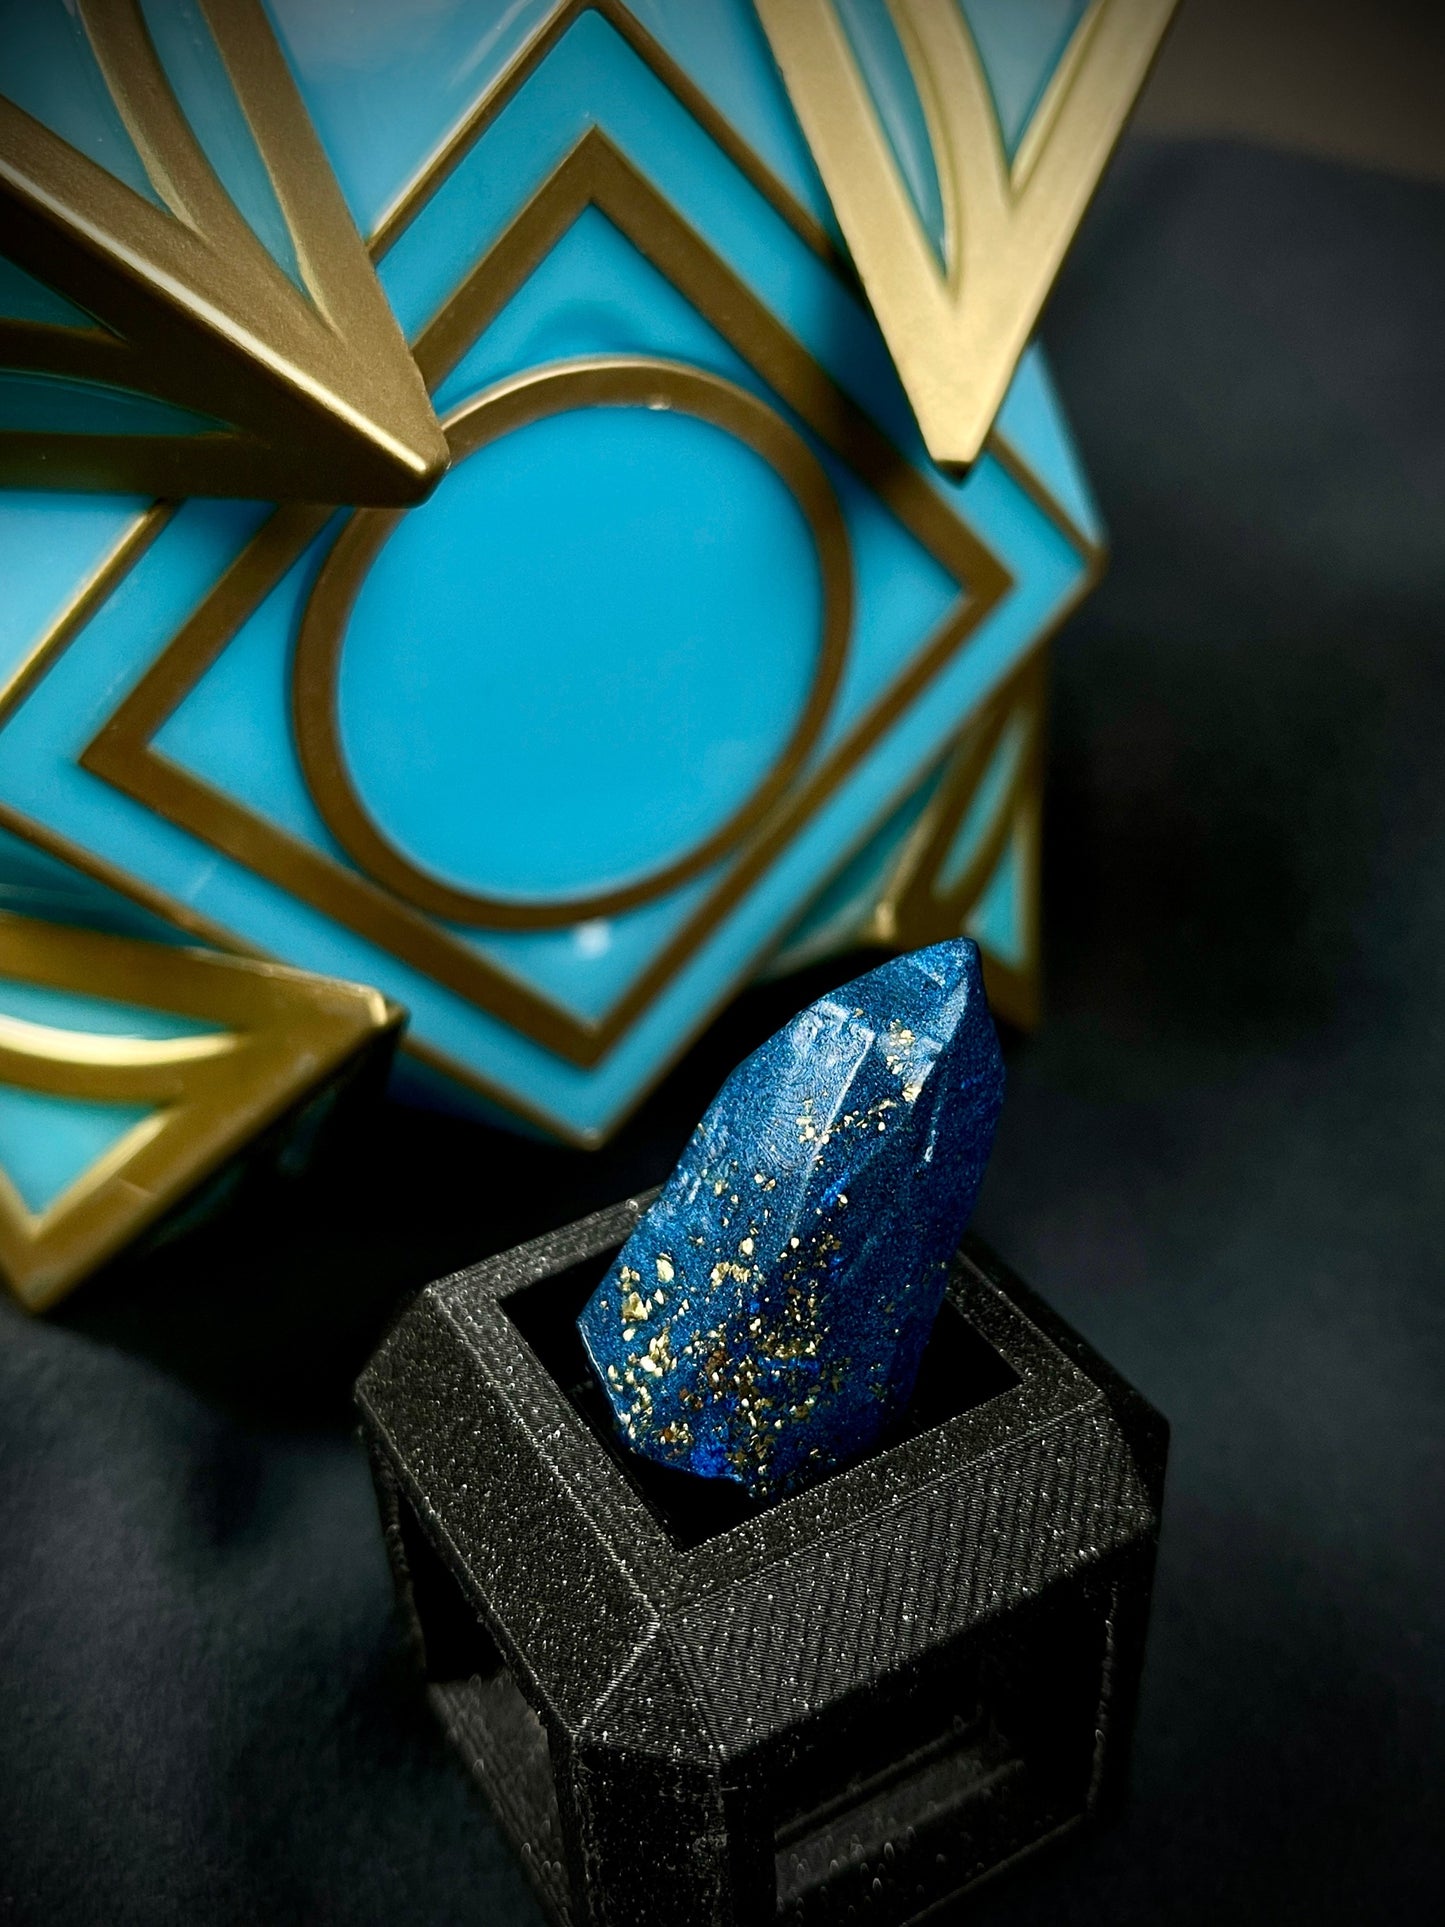 Stardust Crystal, Blue Savi's kyber crystal with gold flakes. In front of Jedi Holocron